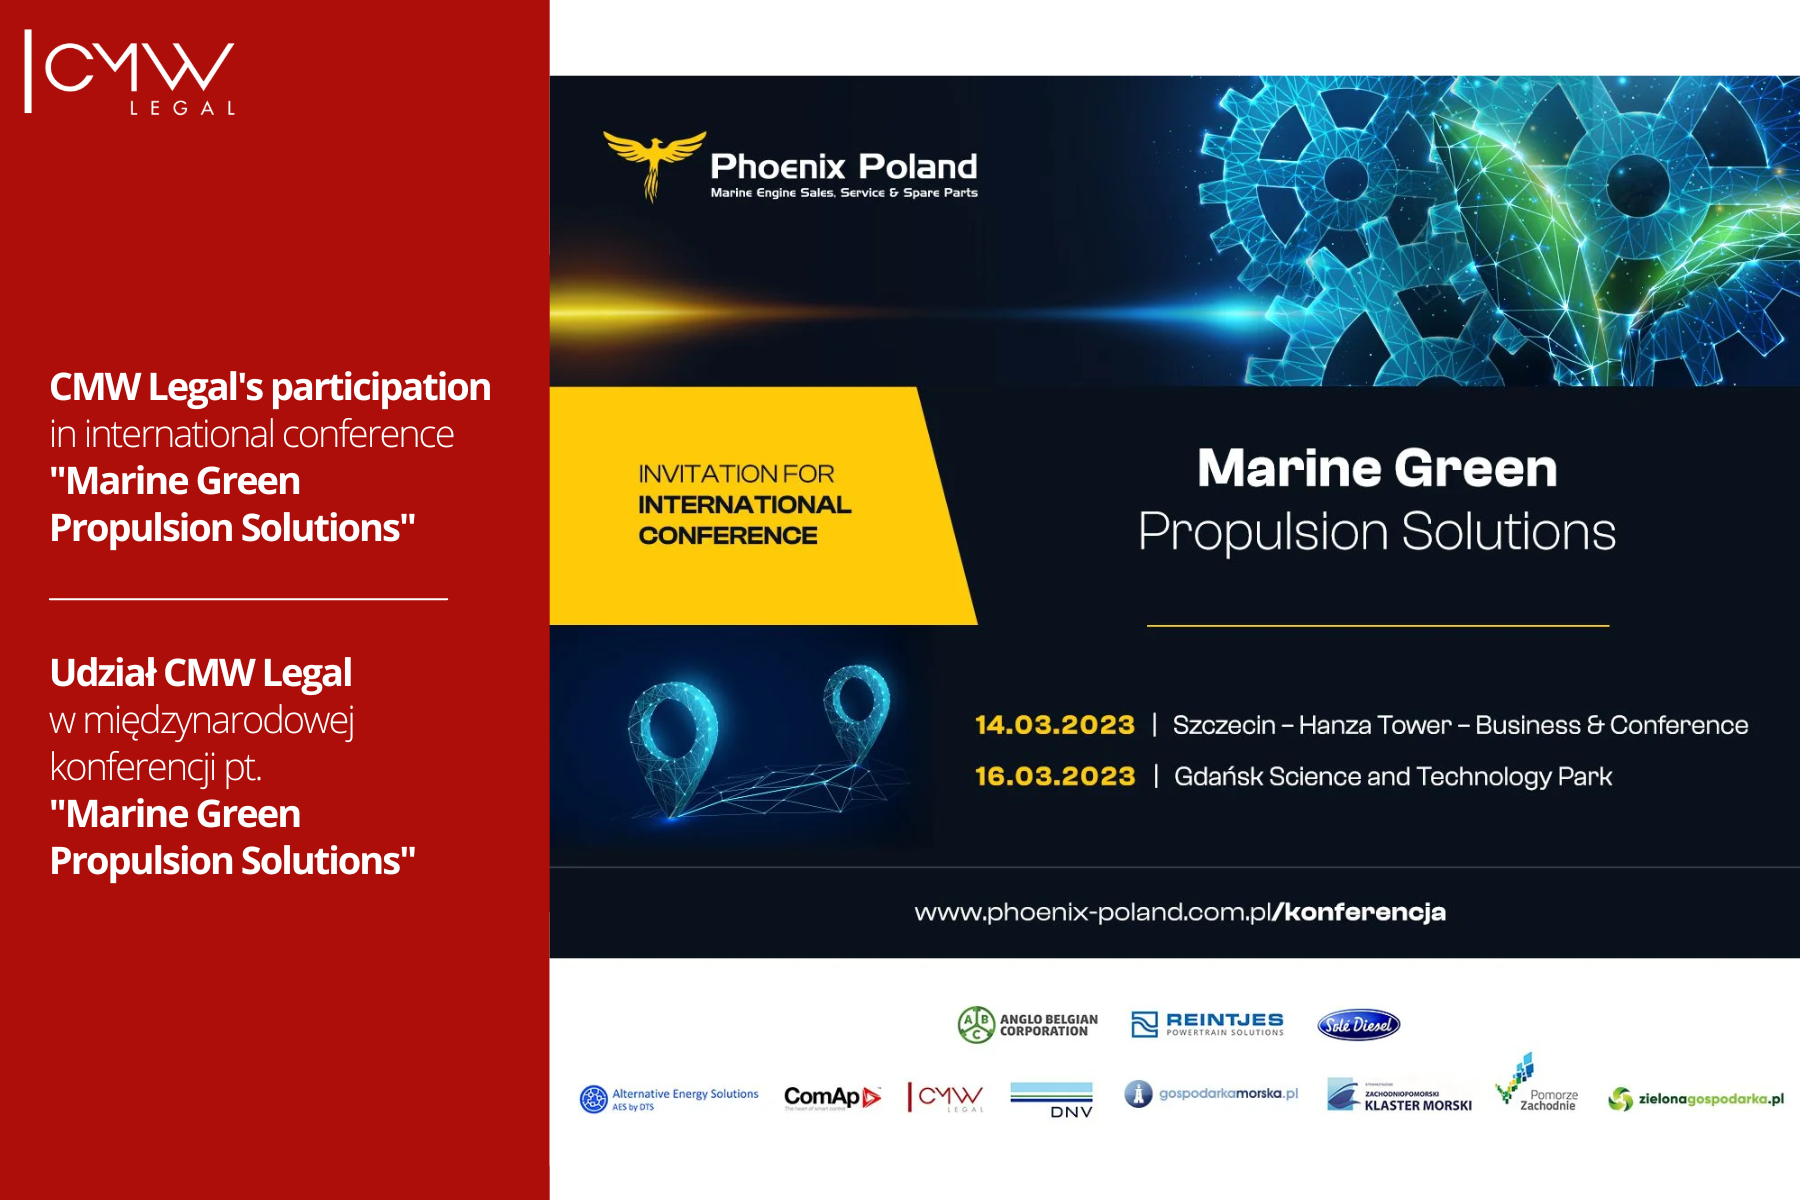  “Marine Green Propulsion Solutions” – an international conference in Szczecin and Gdansk with the participation of CMW Legal. 